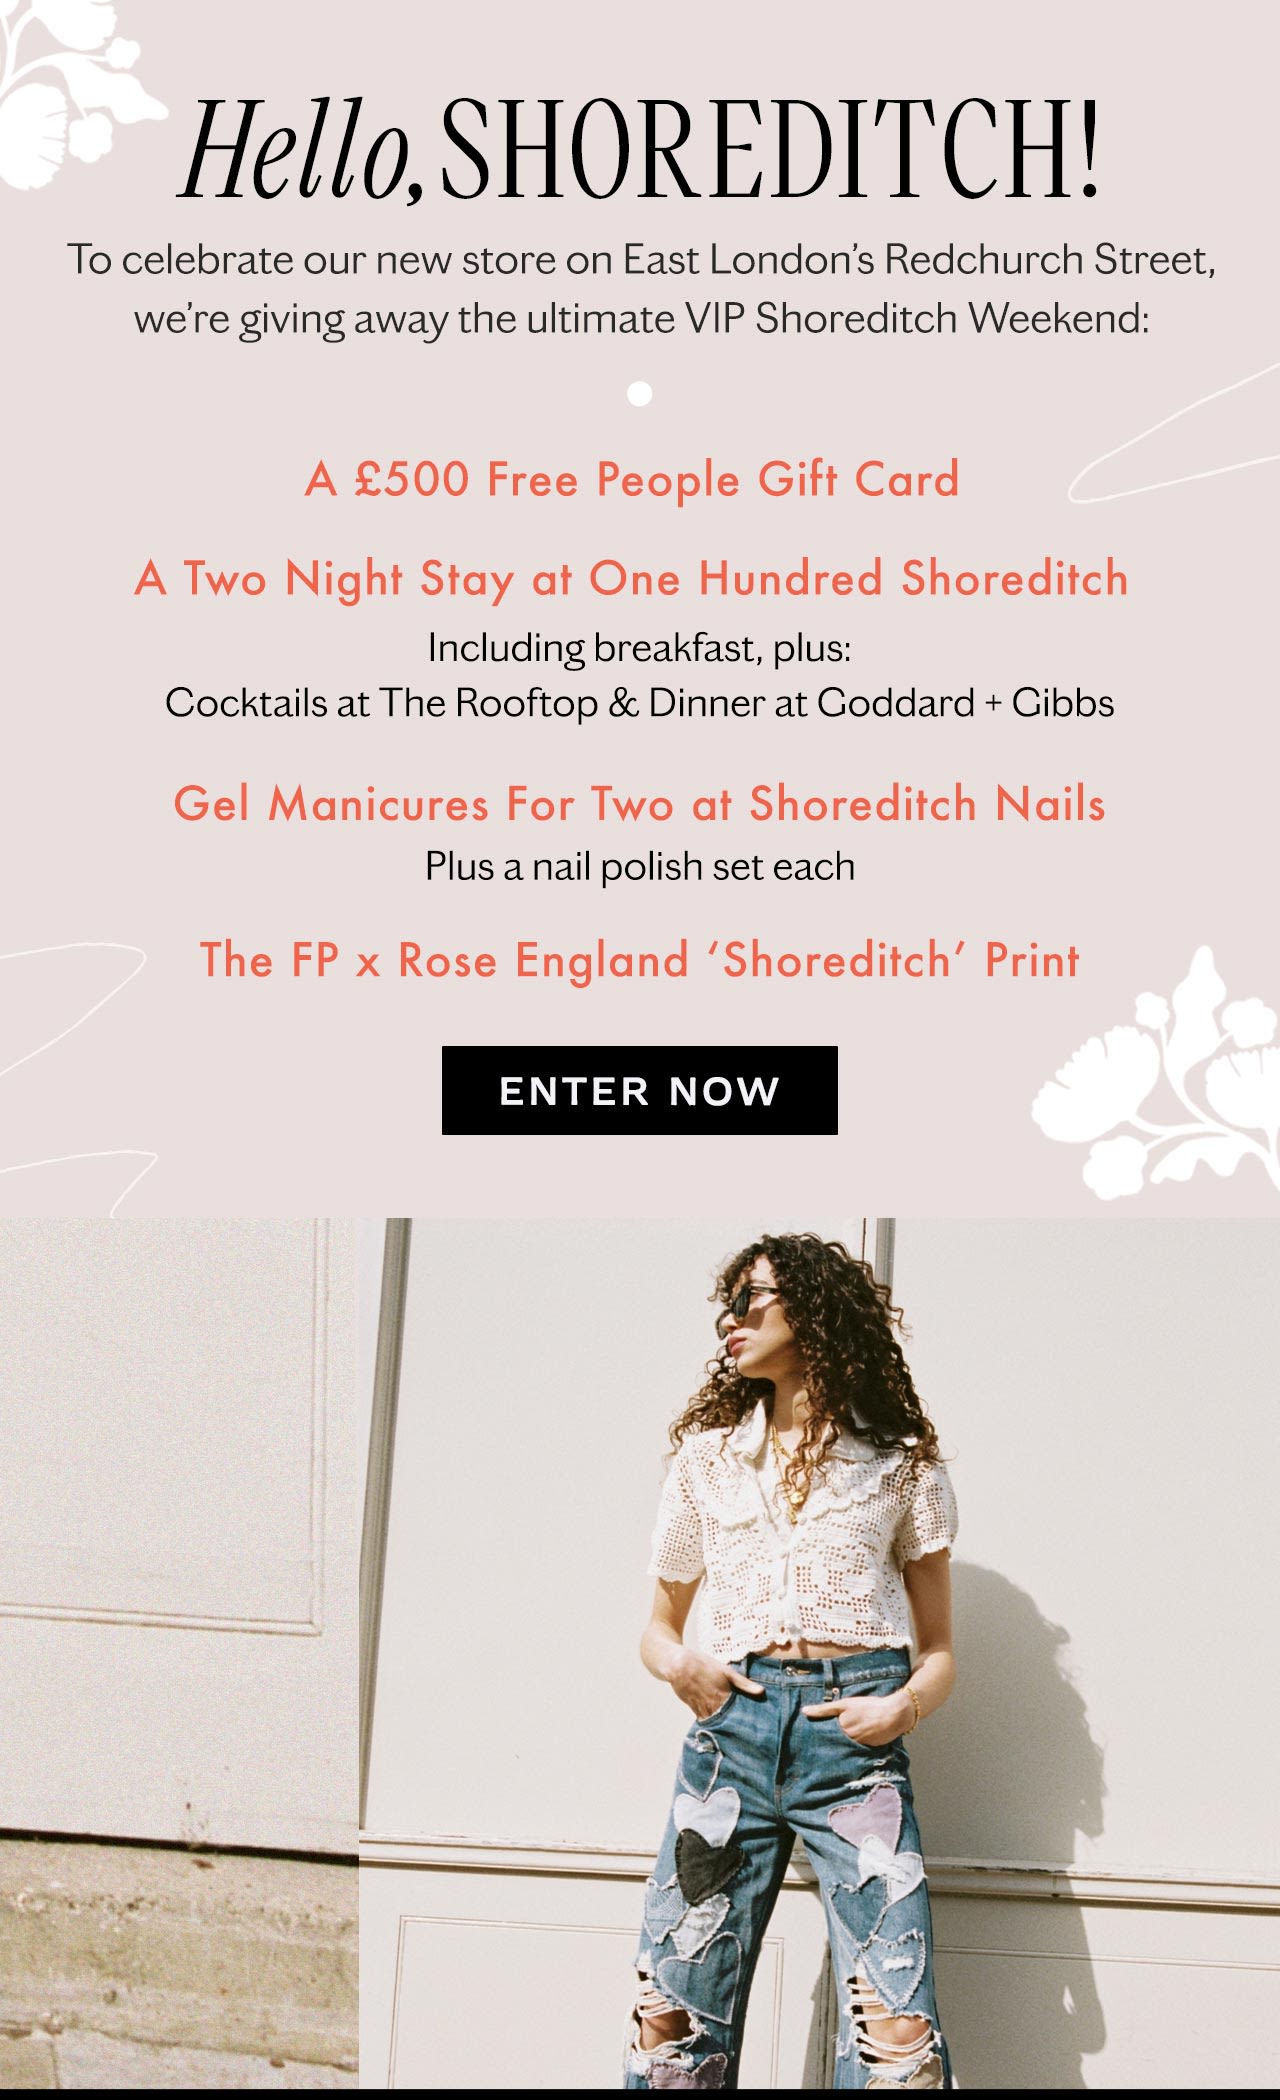 Competitions ★ | Win Free Clothes, Gifts Cards + More